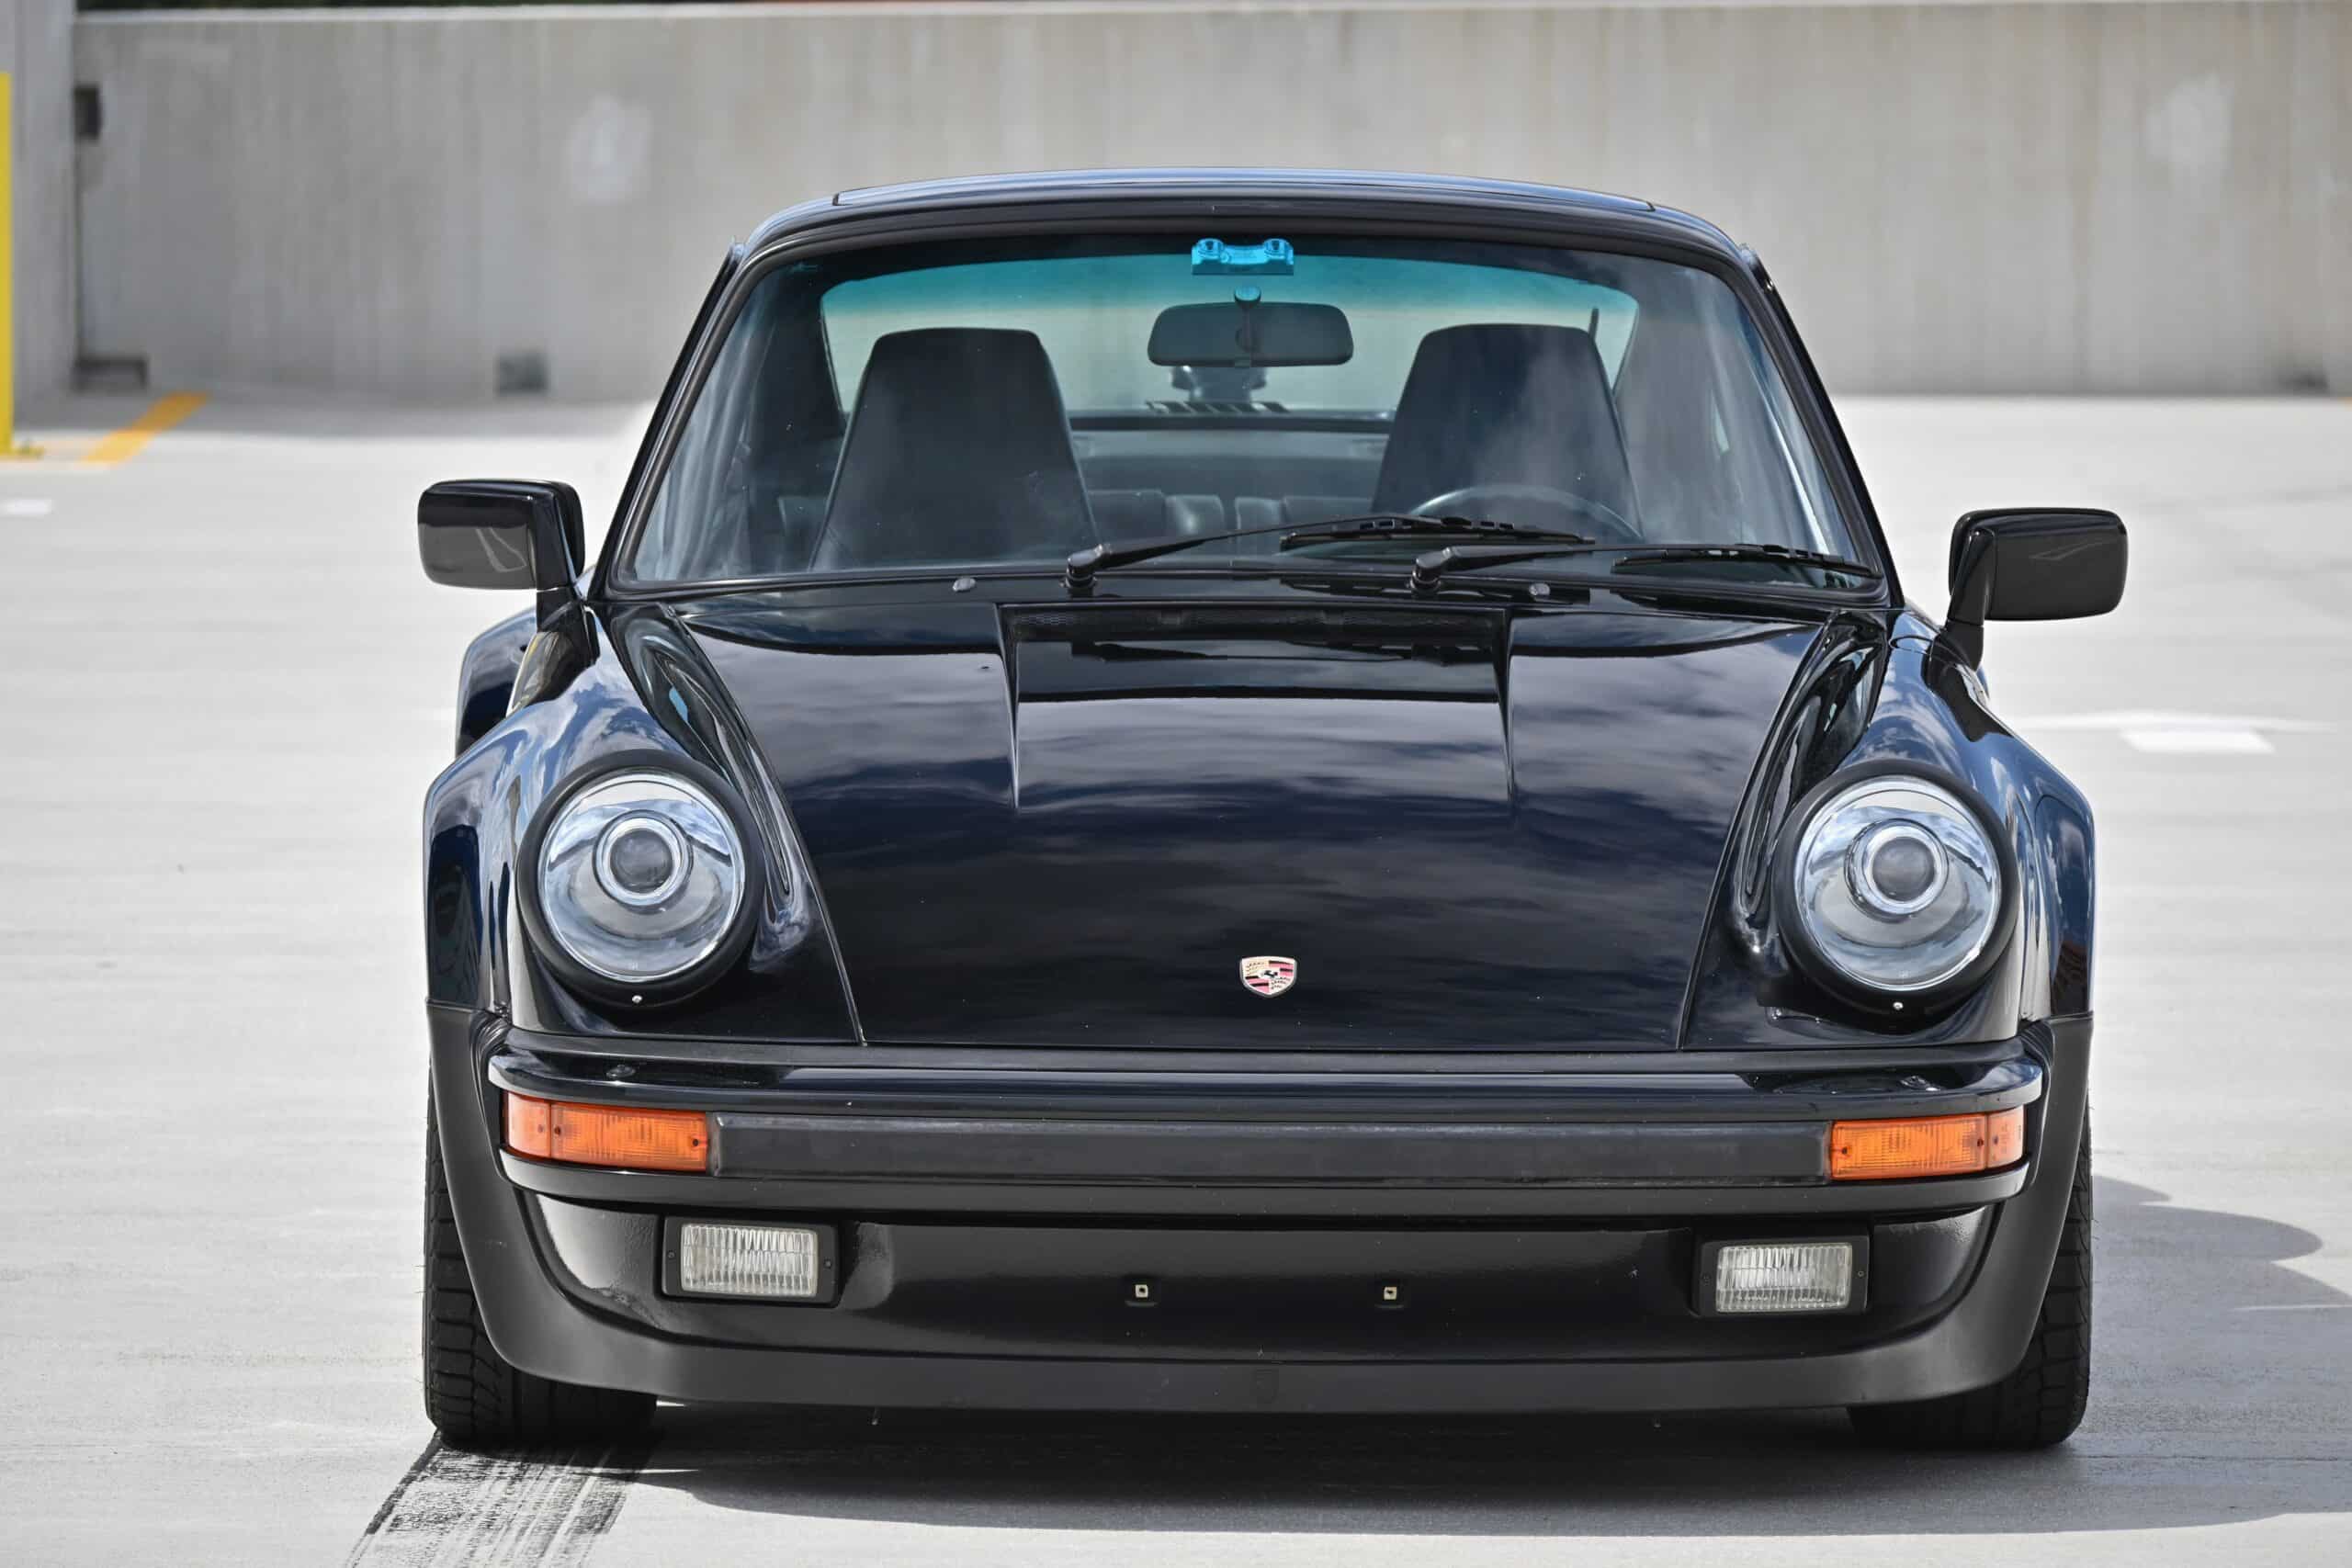 1987 Porsche 911 Turbo 930 Only 43K Miles / Turbo Fuchs / Matching Numbers / Original Paint